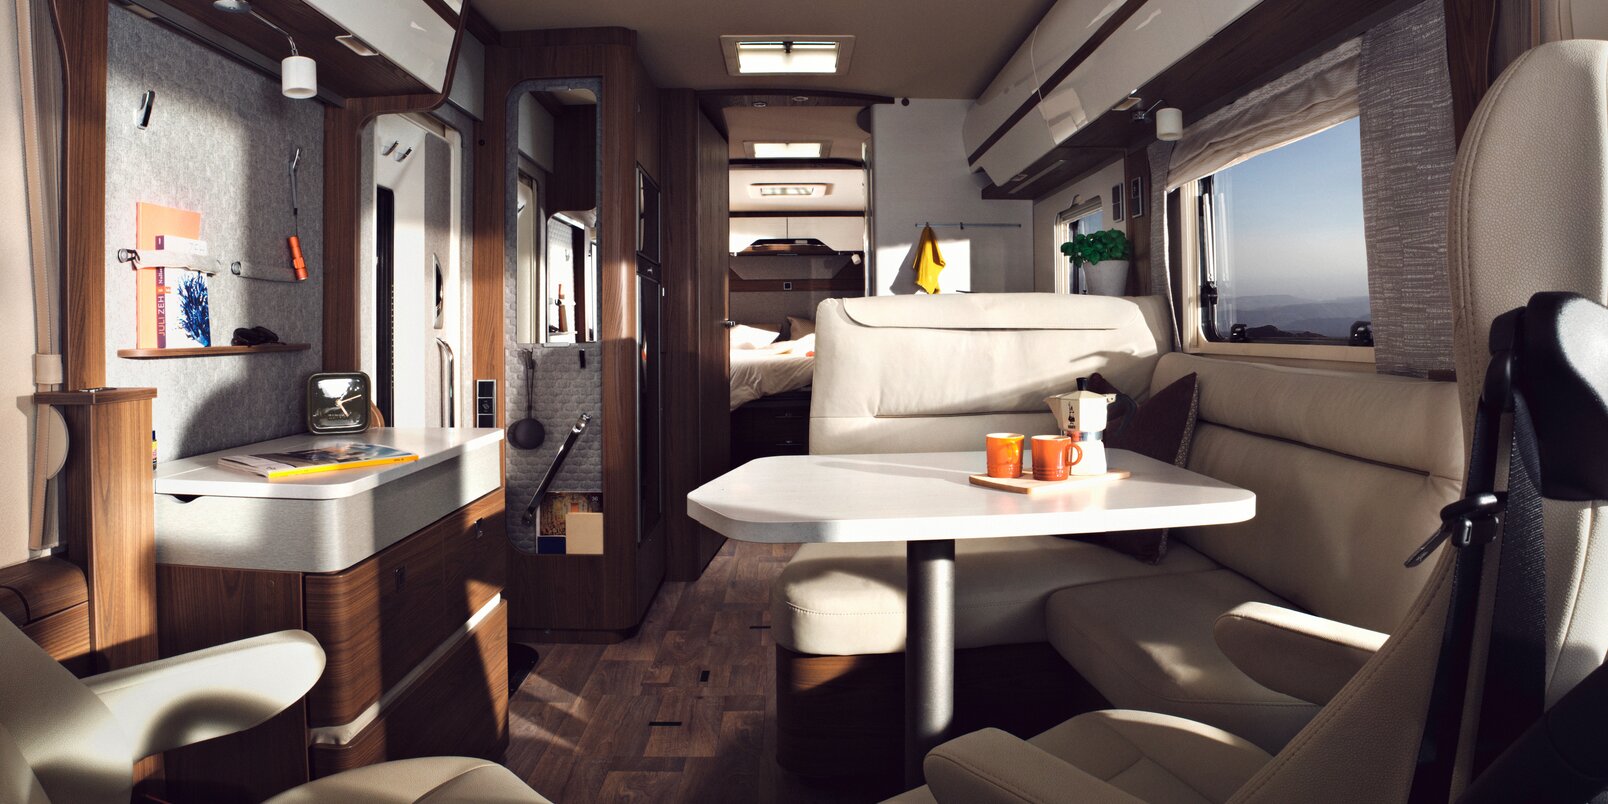 Brightly designed interior of the HYMER-B-MasterLine with seating area, sideboard and lots of storage spaces and shelves